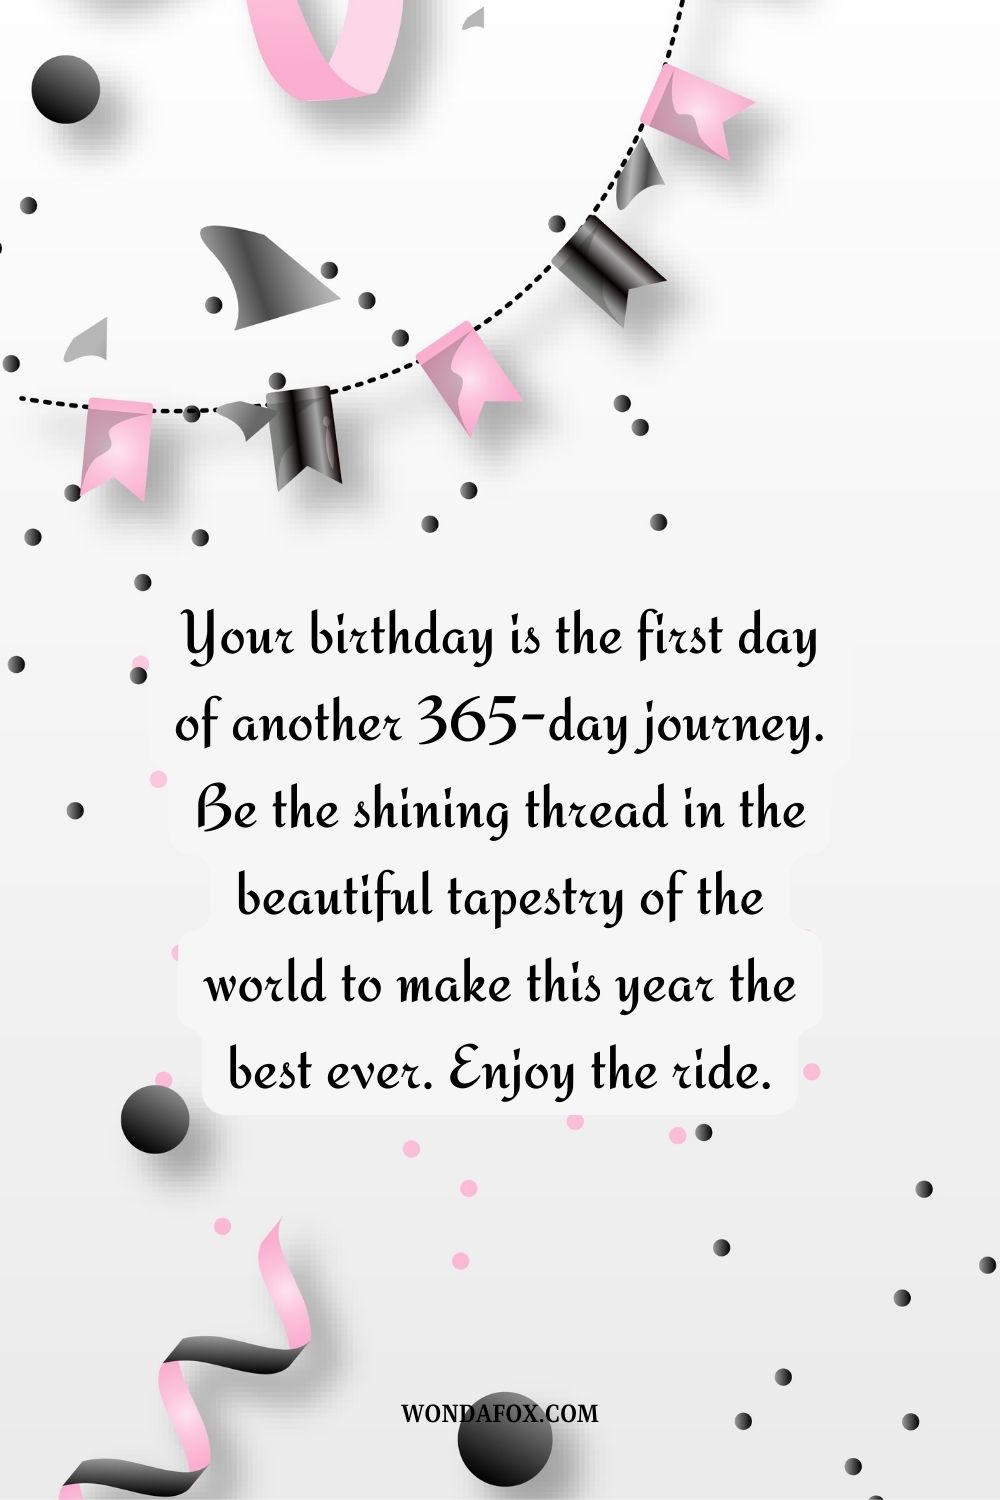 “Your birthday is the first day of another 365-day journey. Be the shining thread in the beautiful tapestry of the world to make this year the best ever. Enjoy the ride.”